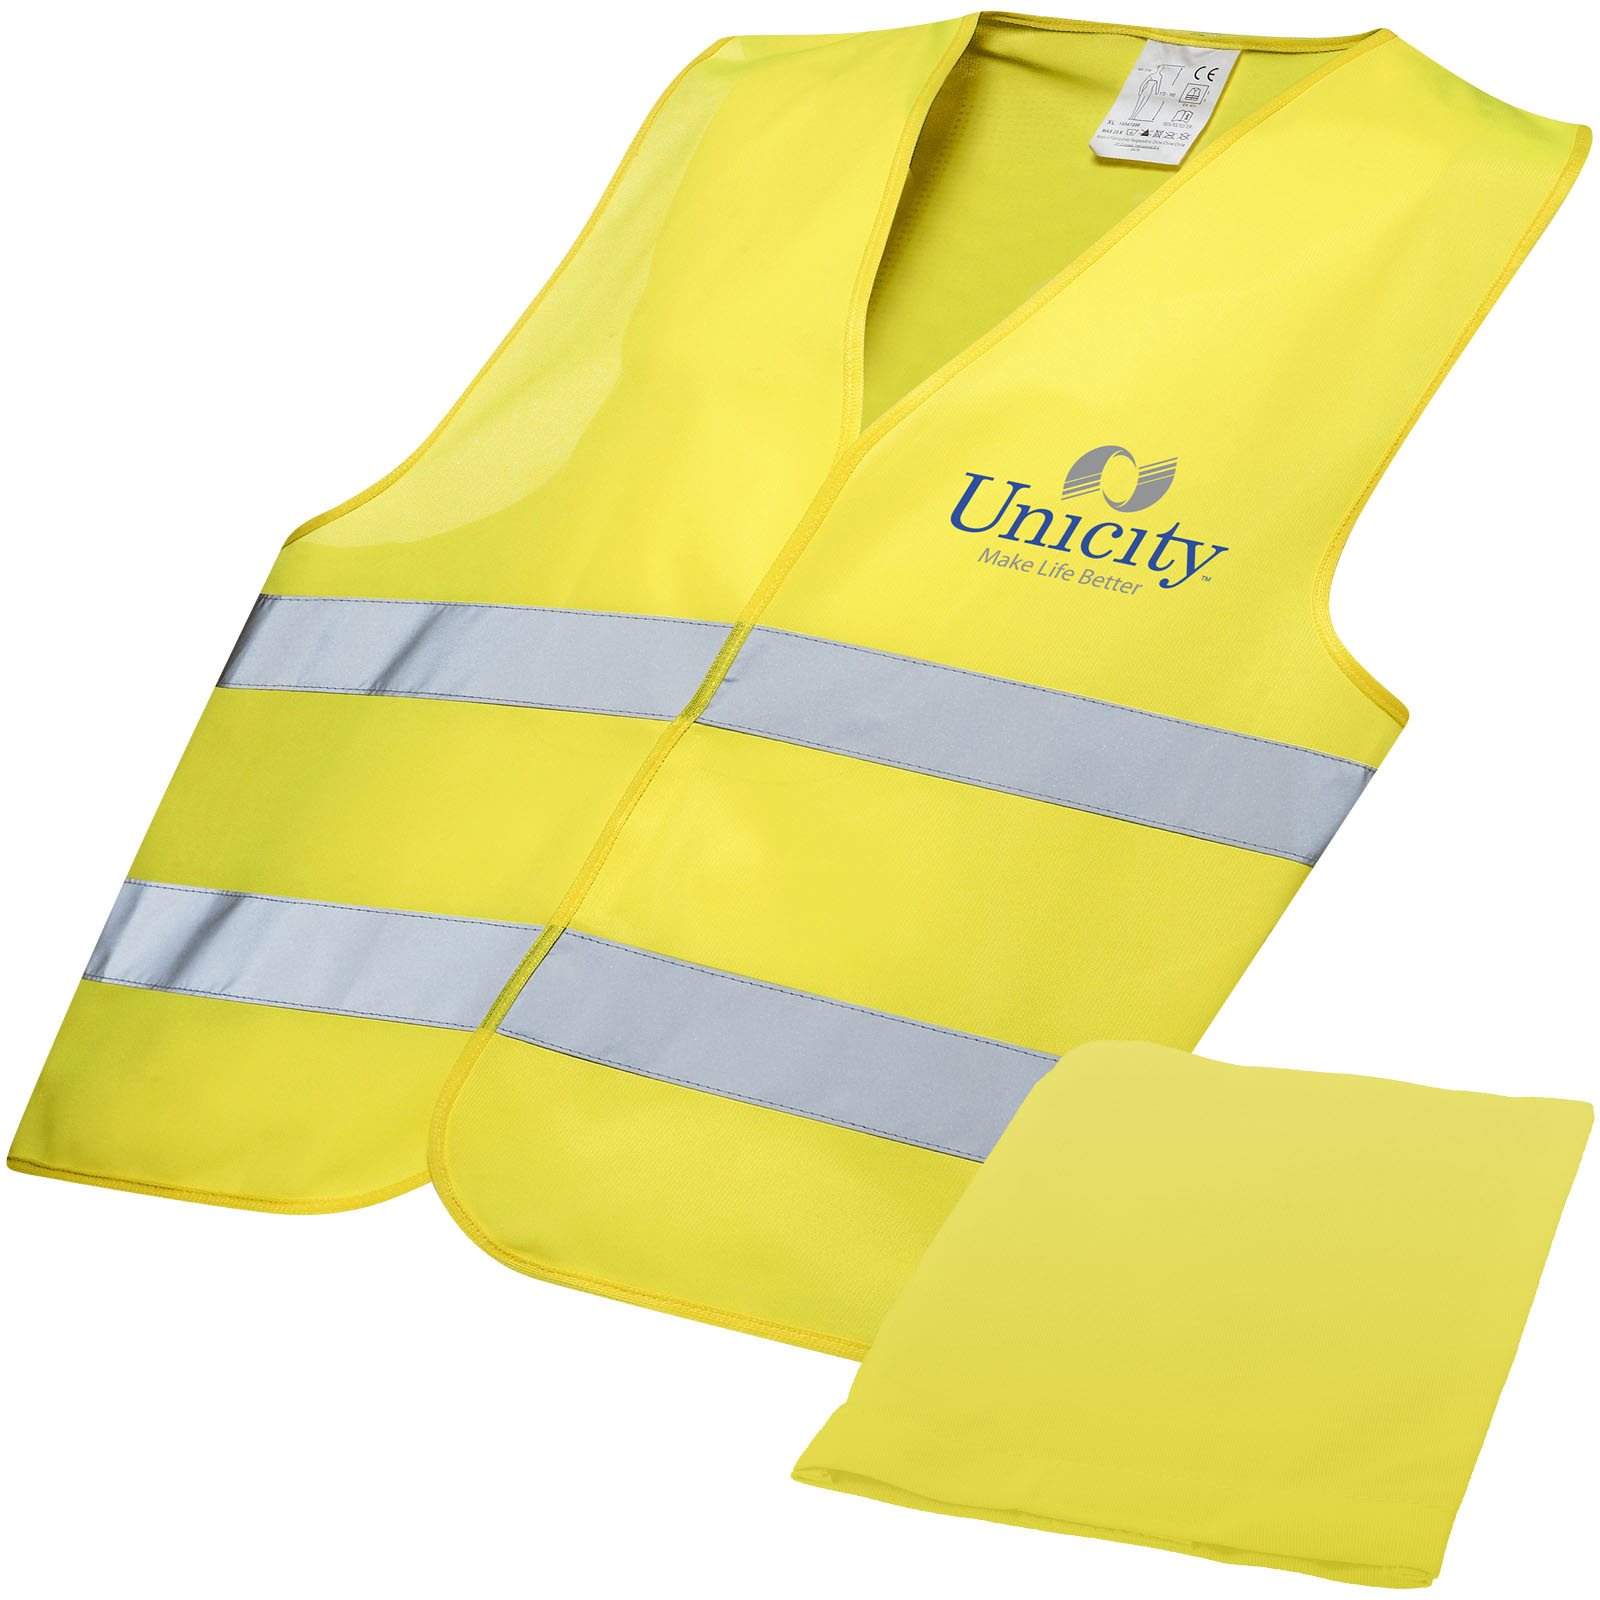 Advertising Safety Vests - RFX™ Watch-out XL safety vest in pouch for professional use - 0